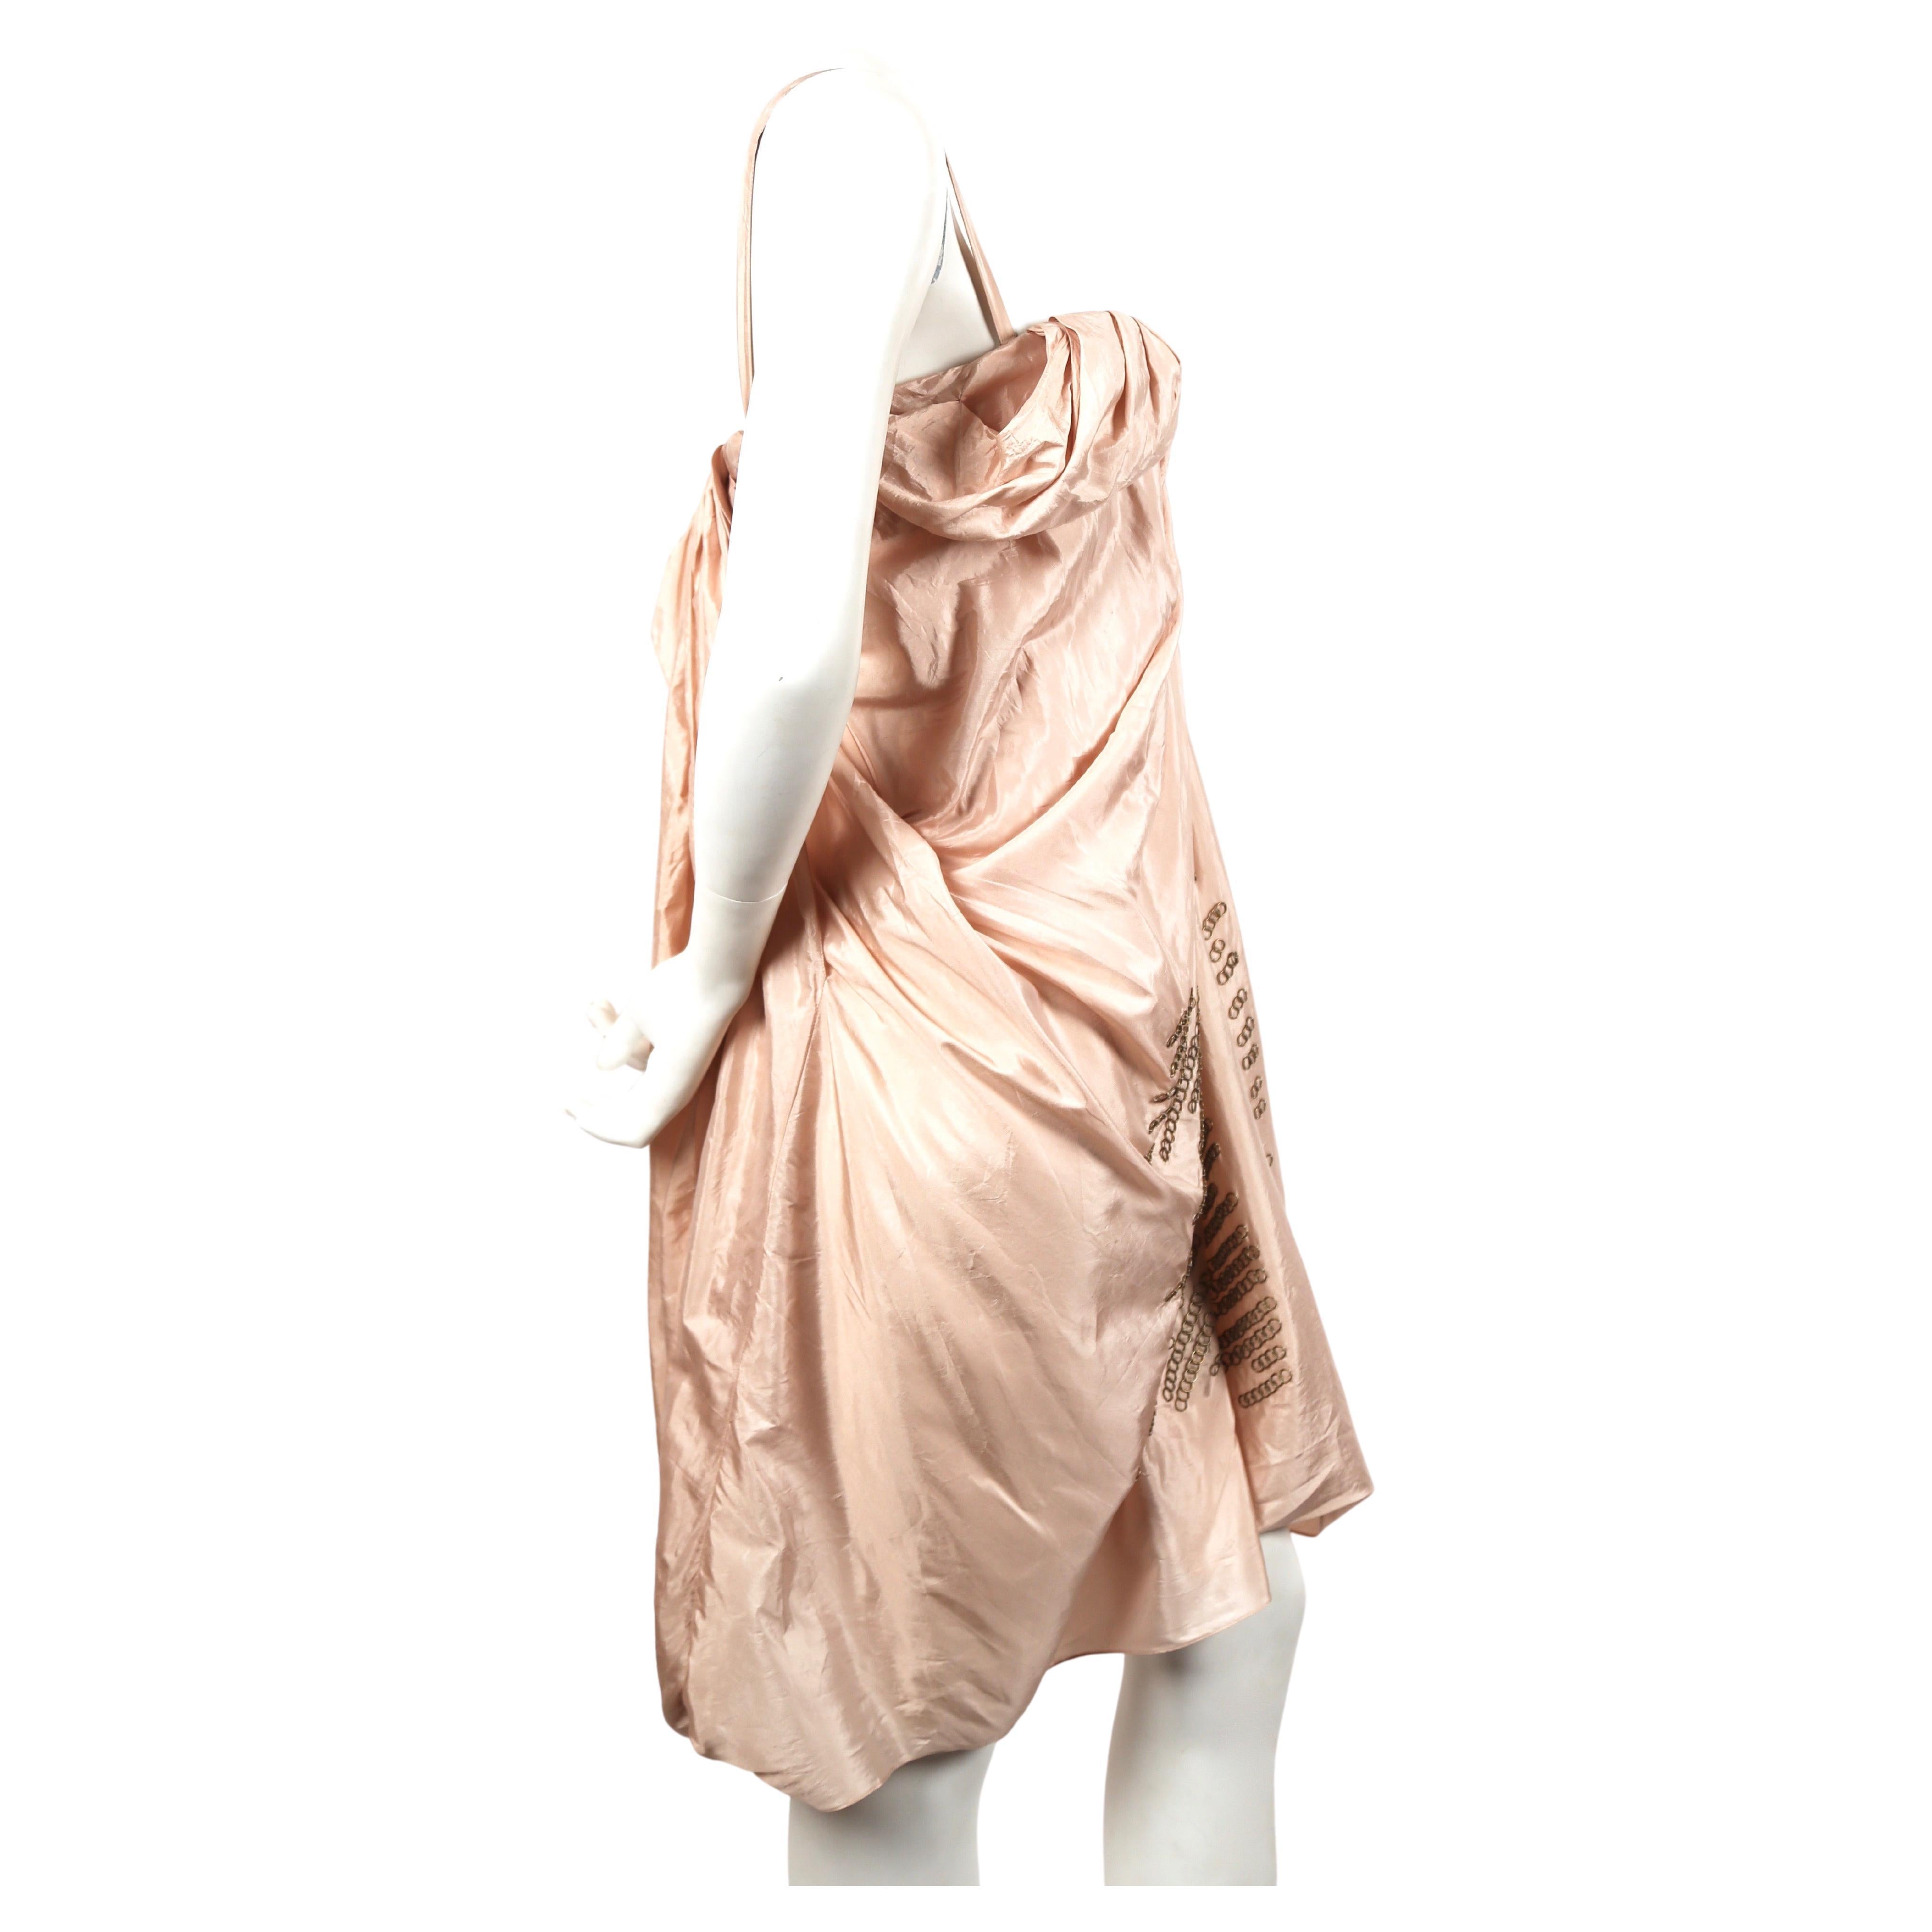 Champagne-pink, silk dress with extensive draping and hand-sewn brass ring detail designed by John Galliano for Christian Dior dating spring of 2007 exactly as seen on the 'Back to Basics' runway show. French size 38. Inner corset with light padding